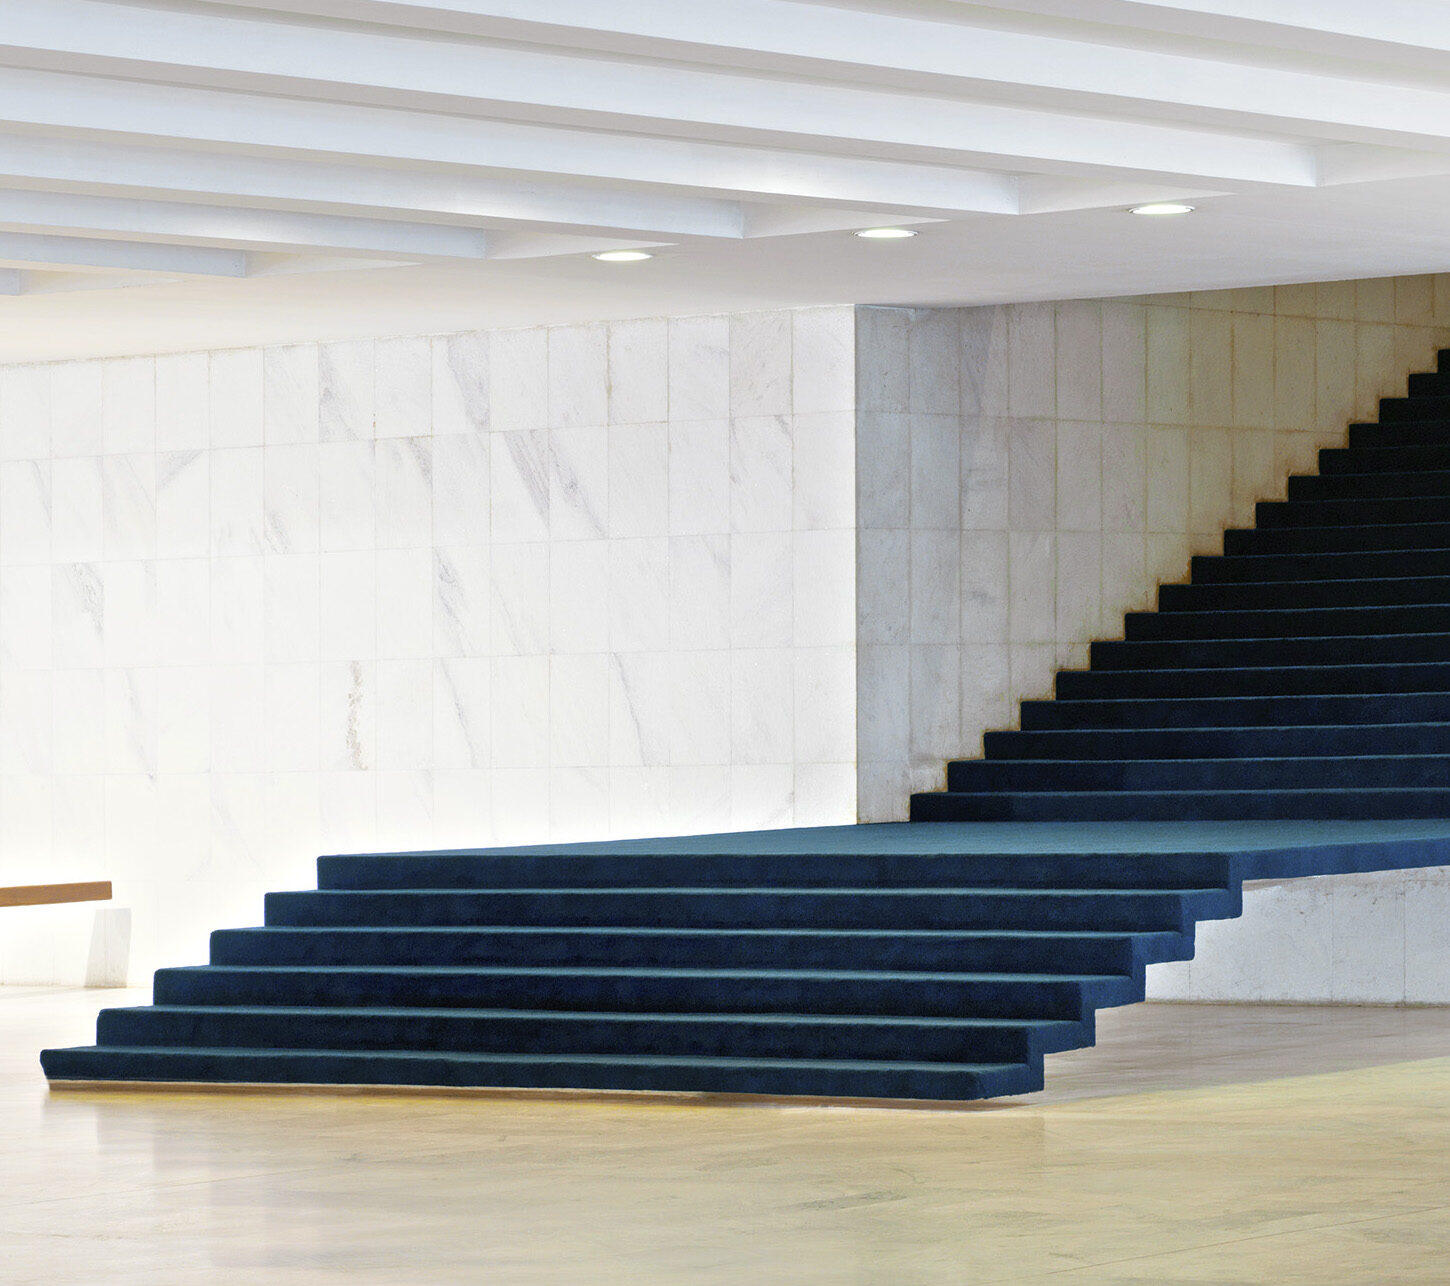 Vincent FournierThe Itamaraty Palace Foreign Relations Ministry Stairs Brasilia arch. Oscar Niemeyer 2012 photograph 90 x 153 cm edition of 10 2AP cópia e1663363589410